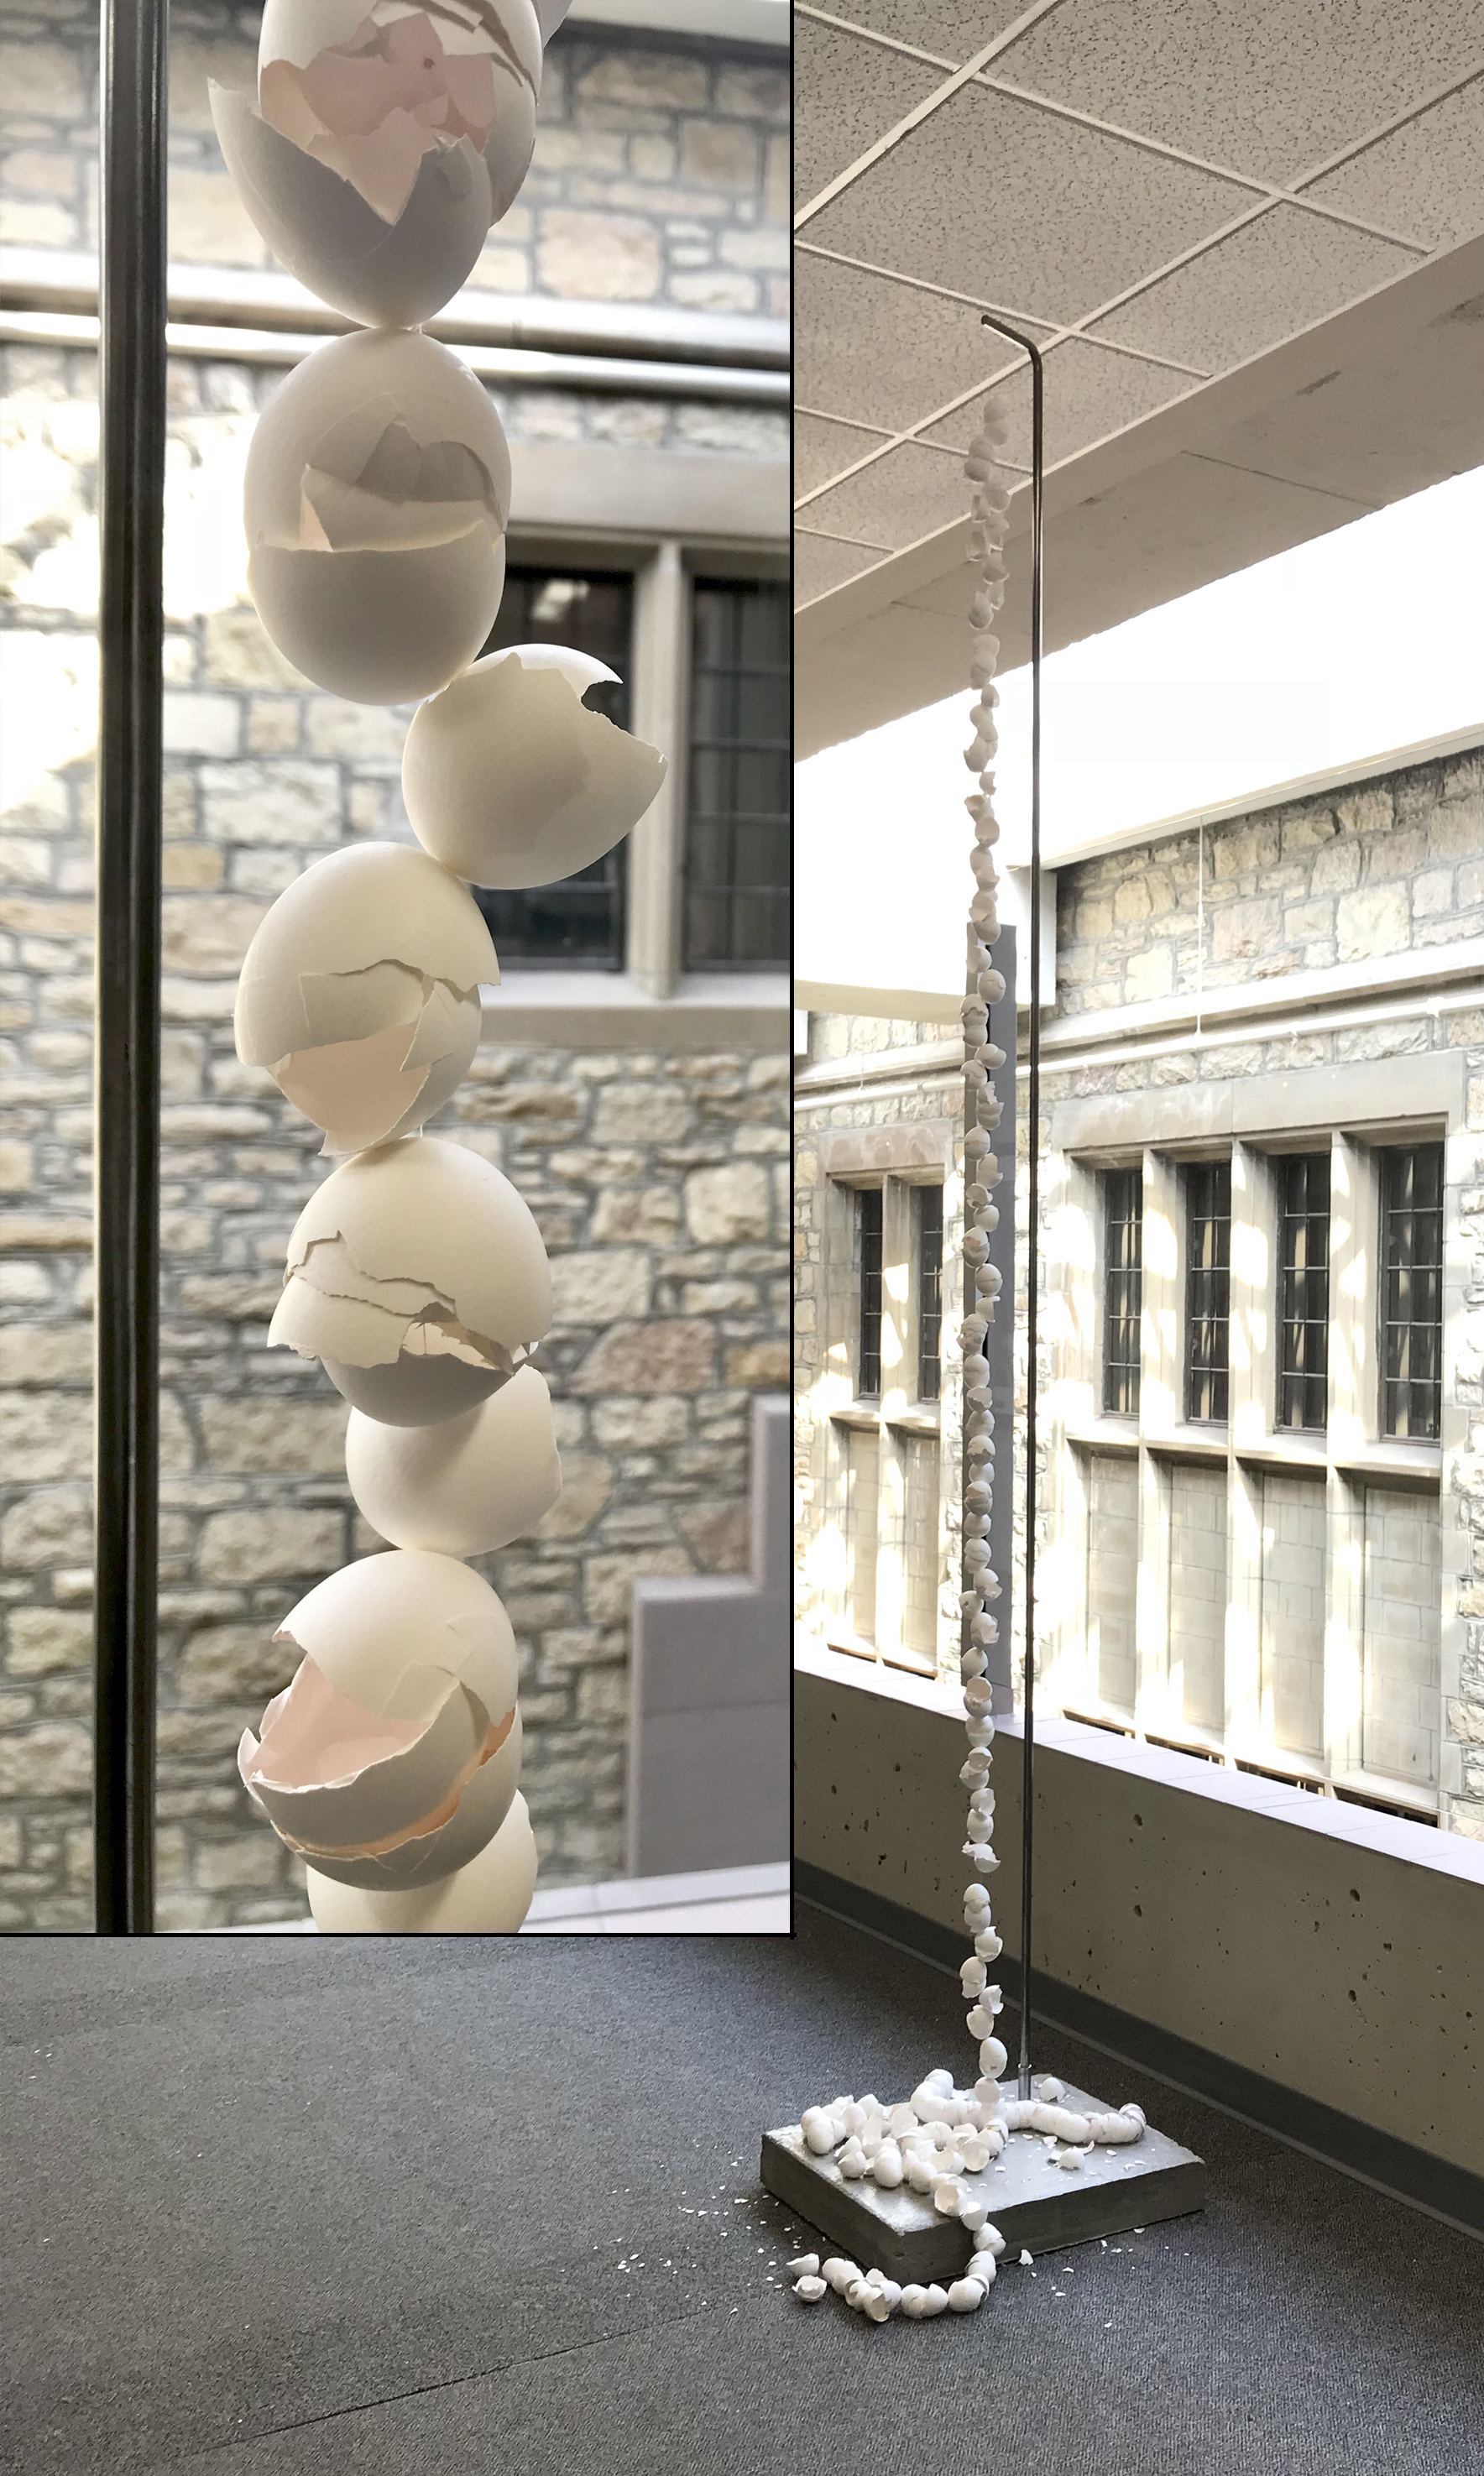 A sculpture created from discarded eggshells for ARTCycled 2018 by Mila Pshebylo